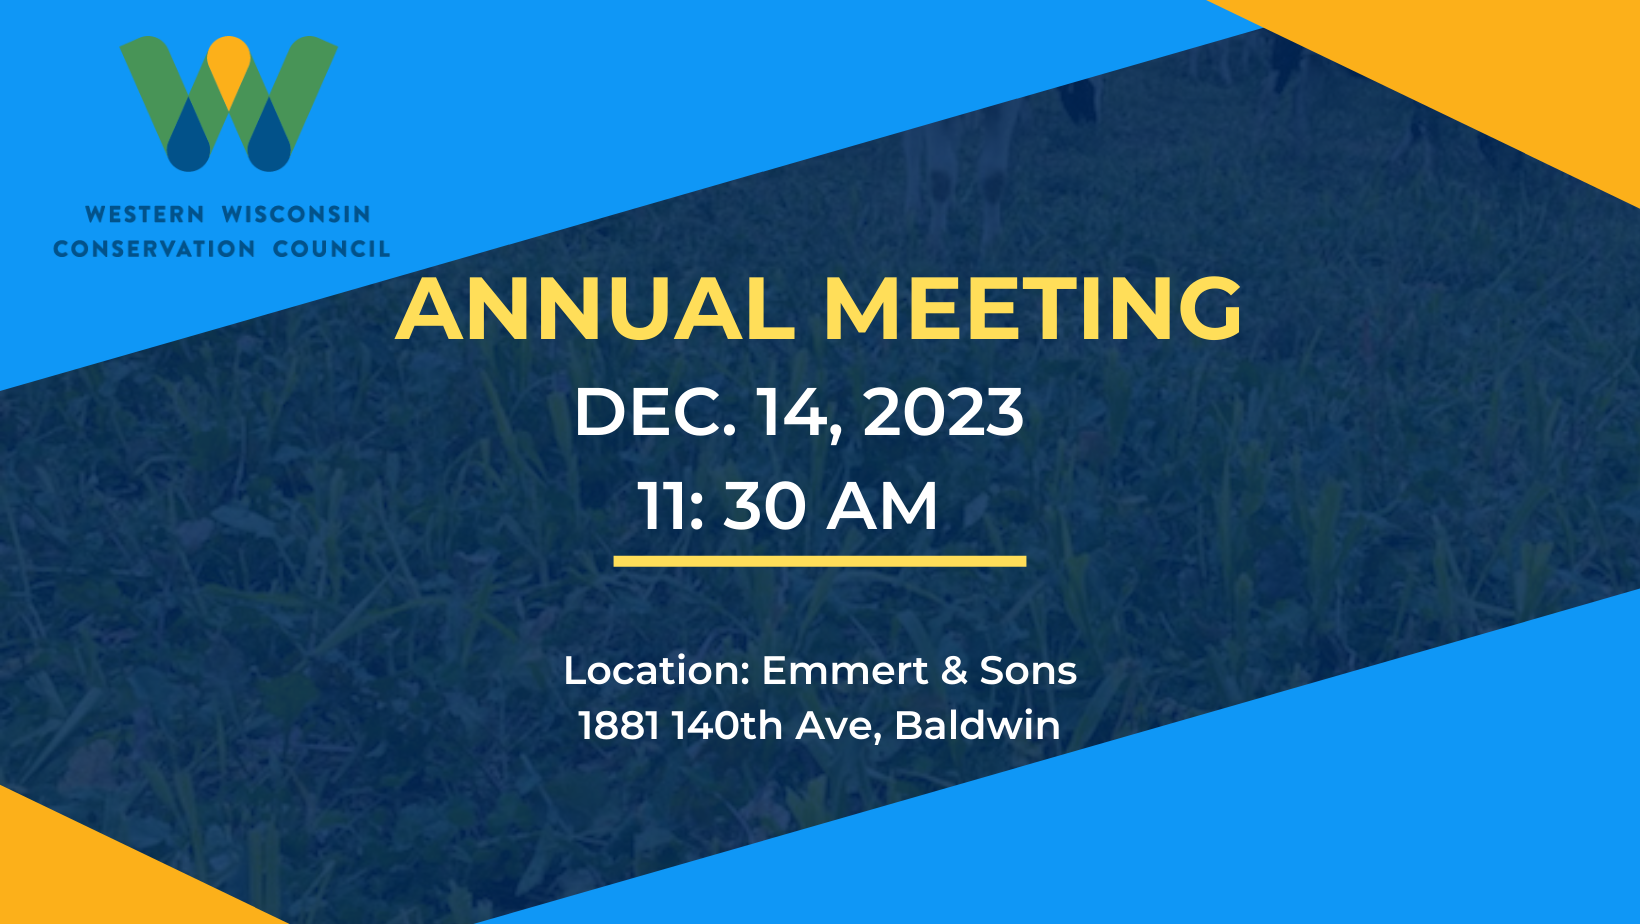 Copy of WWCC Annual Meeting 23- Save the Date (Facebook Cover) (1)